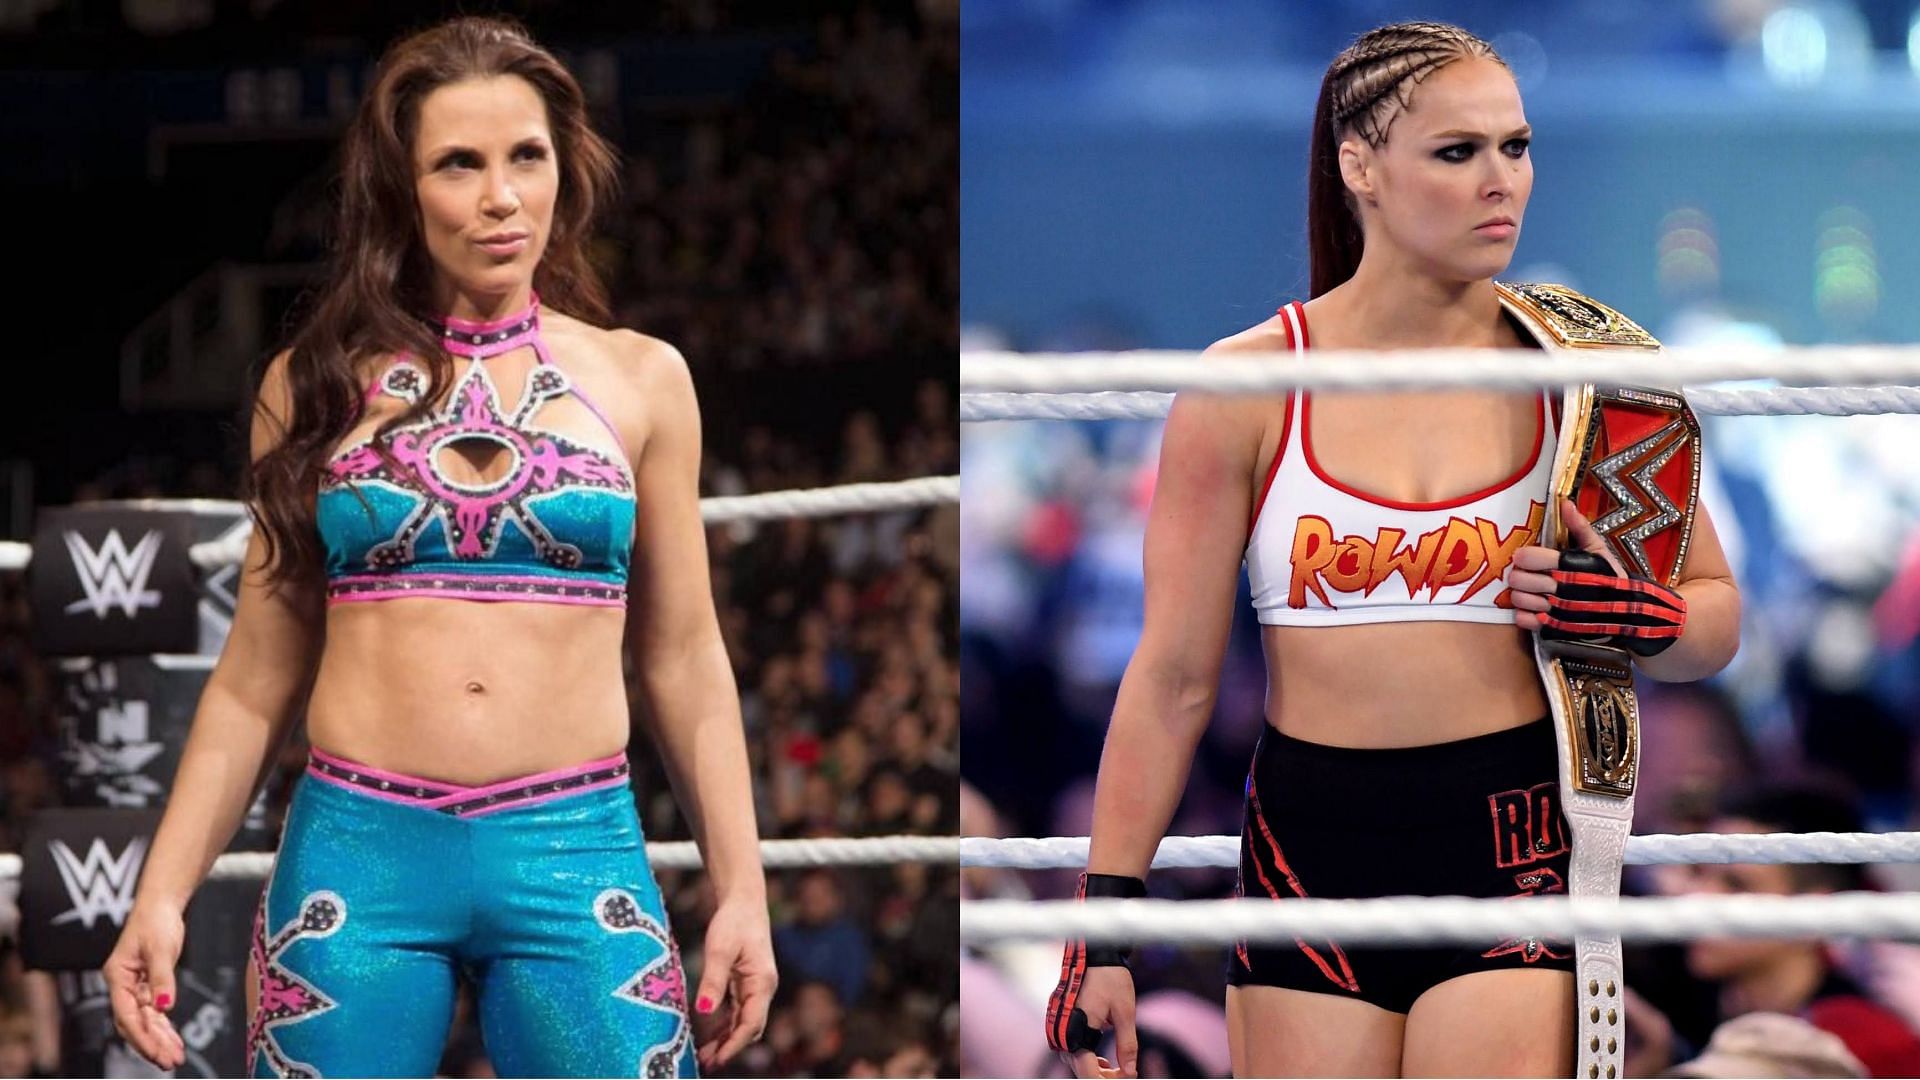 Mickie James (left) and Ronda Rousey (right)